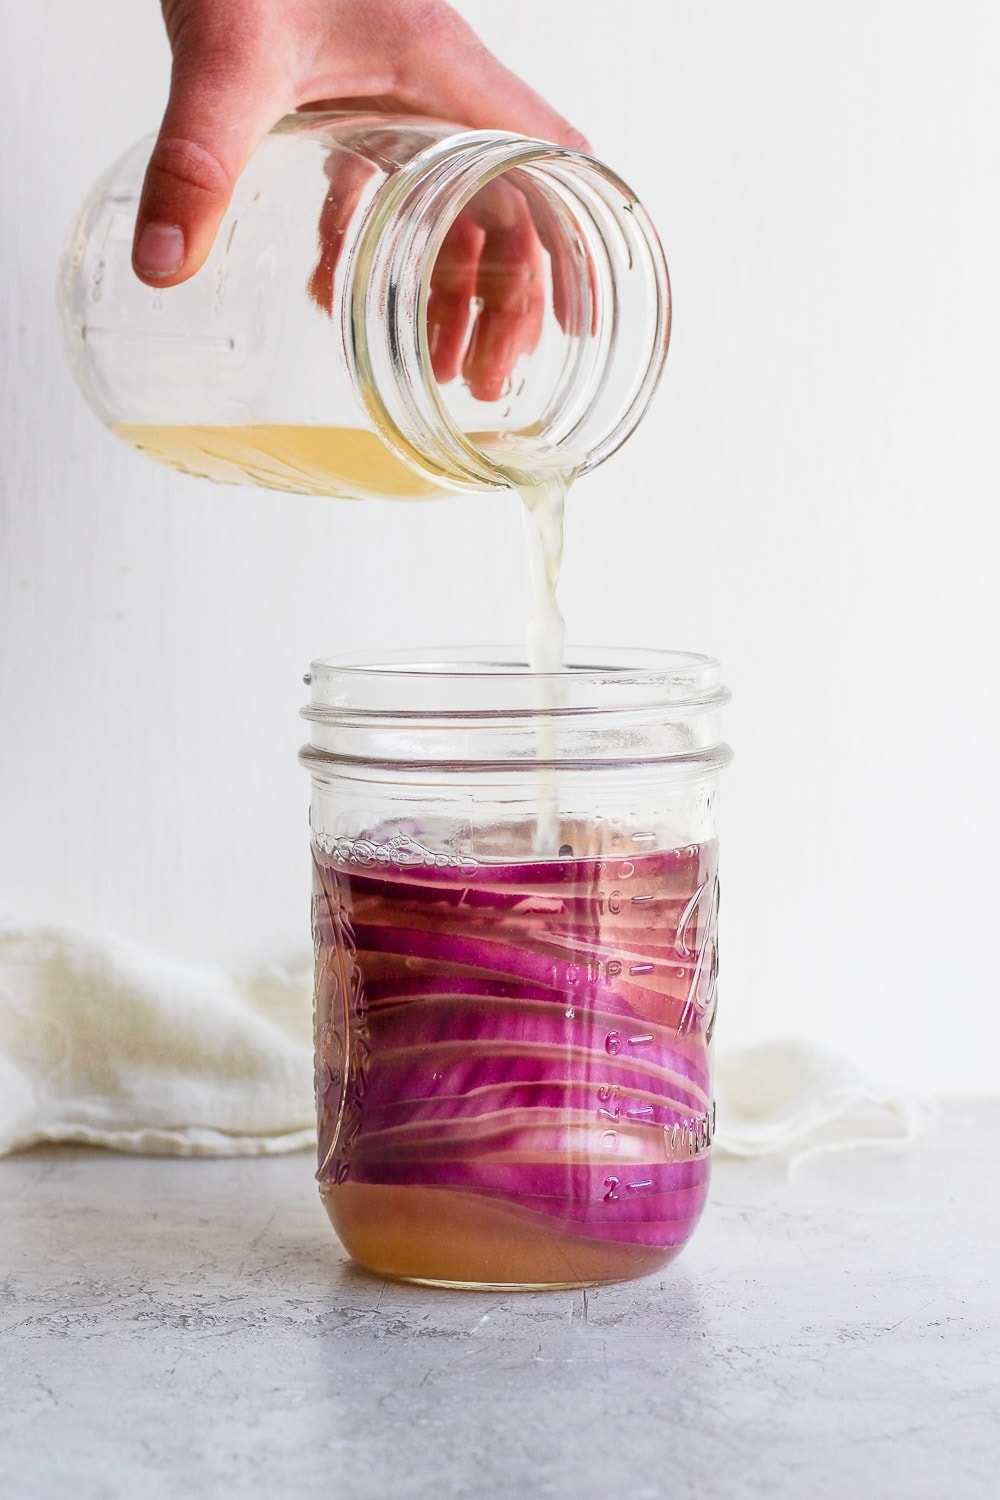 Pouring Vinegar into the mason jar with onions